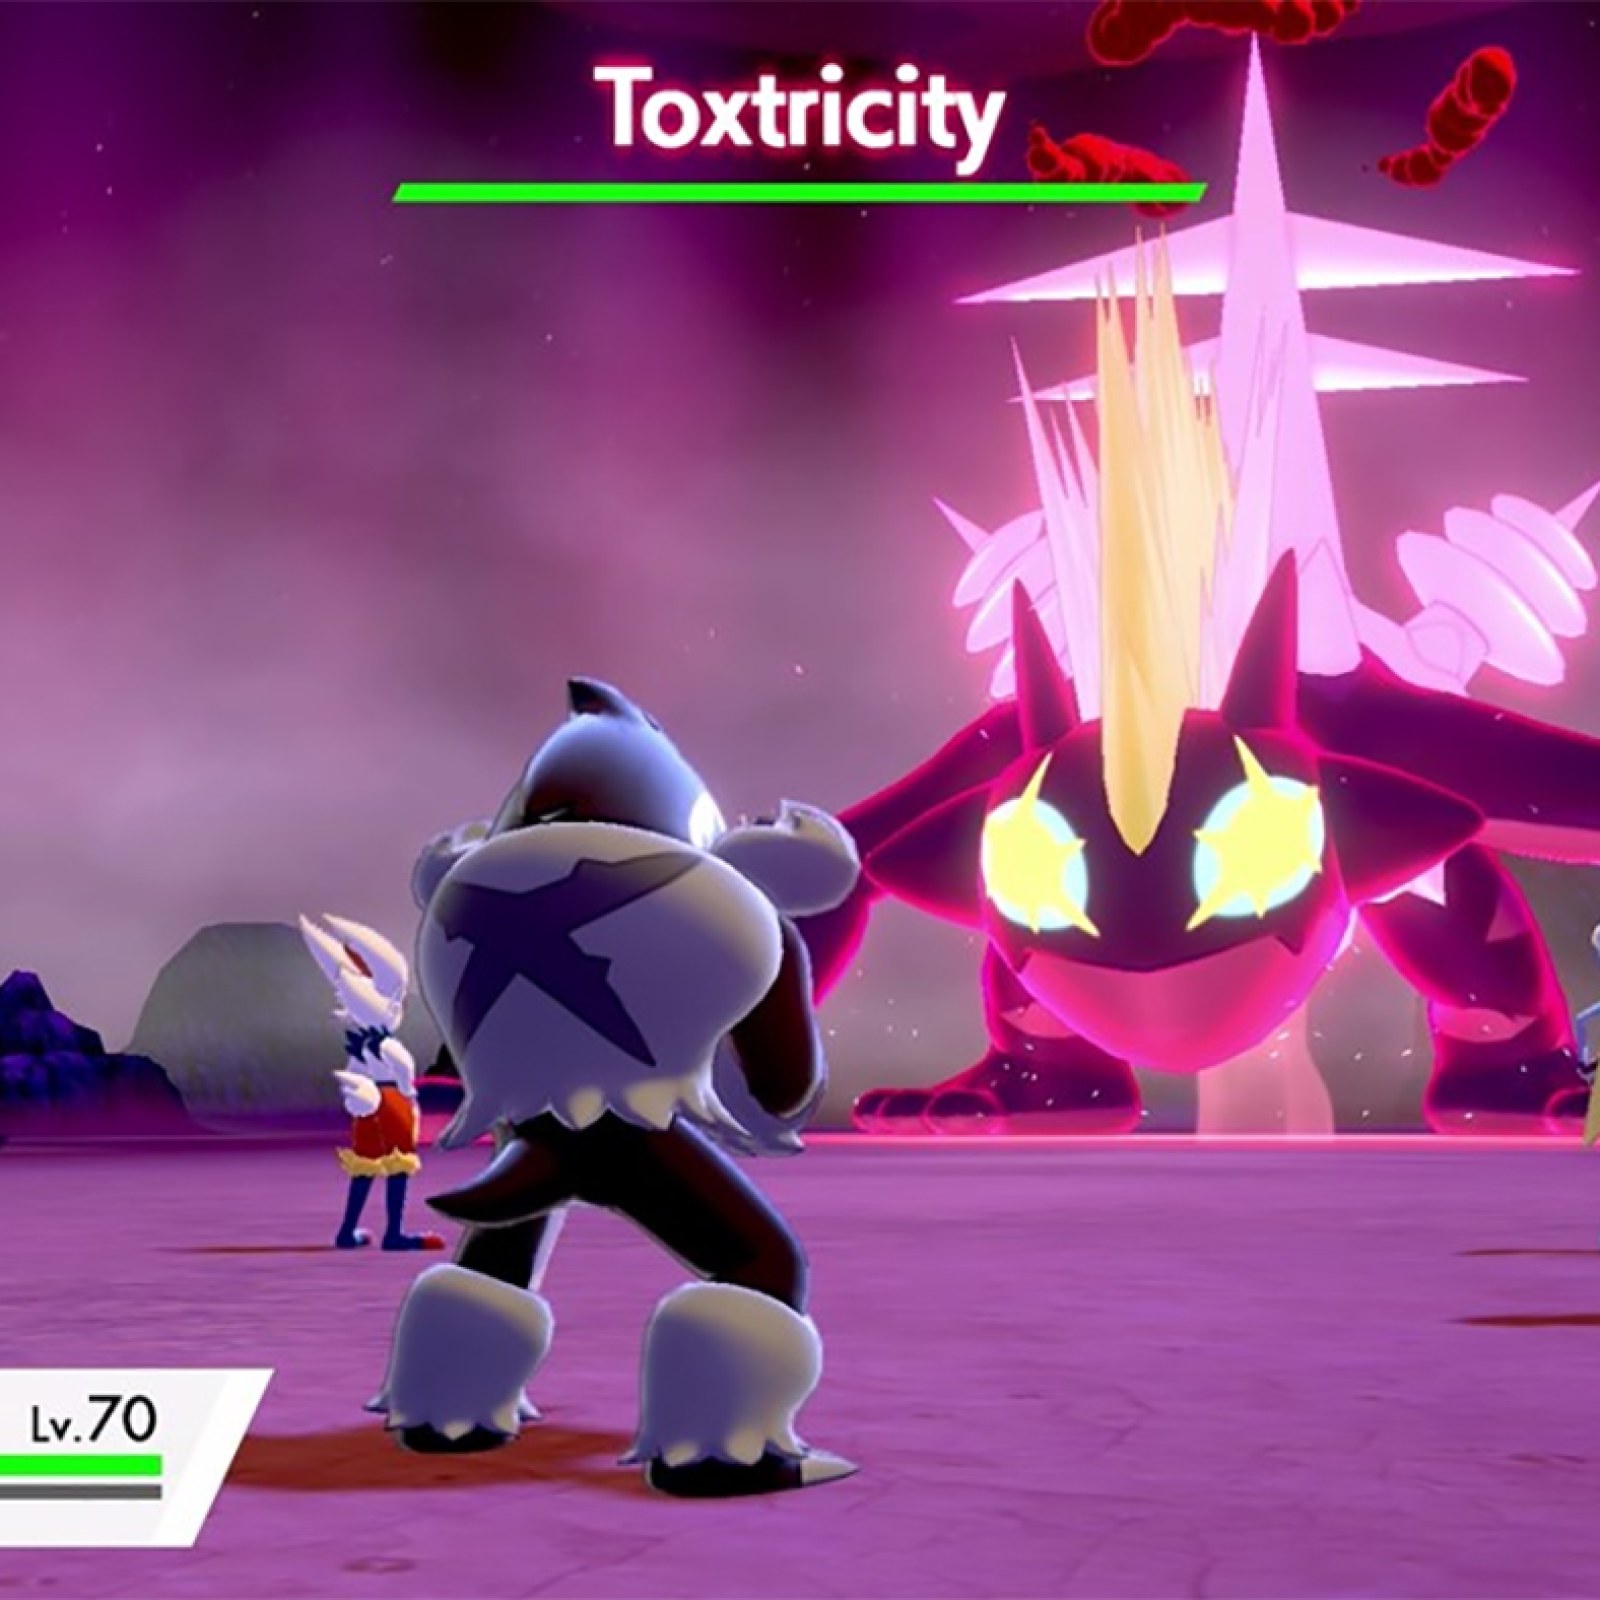 Pokemon Sword And Shield To Add Gigantamax Toxtricity This Week